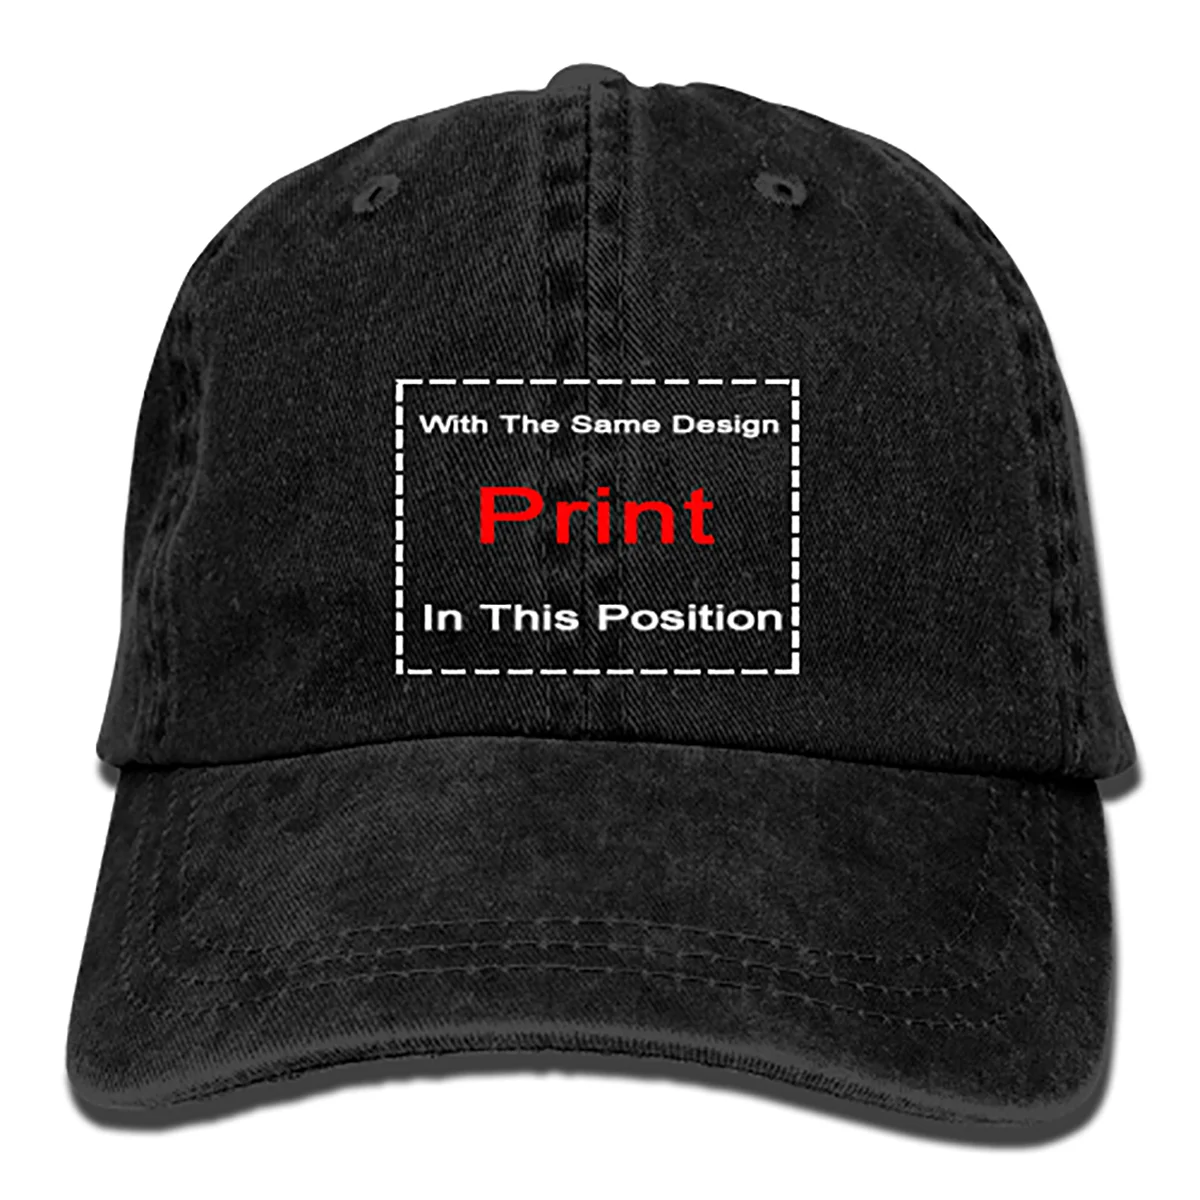 El Jefe -The In Spanish Funny Mexican Cotton Adjustable Jeans Cap Gym Caps For Man And Woman